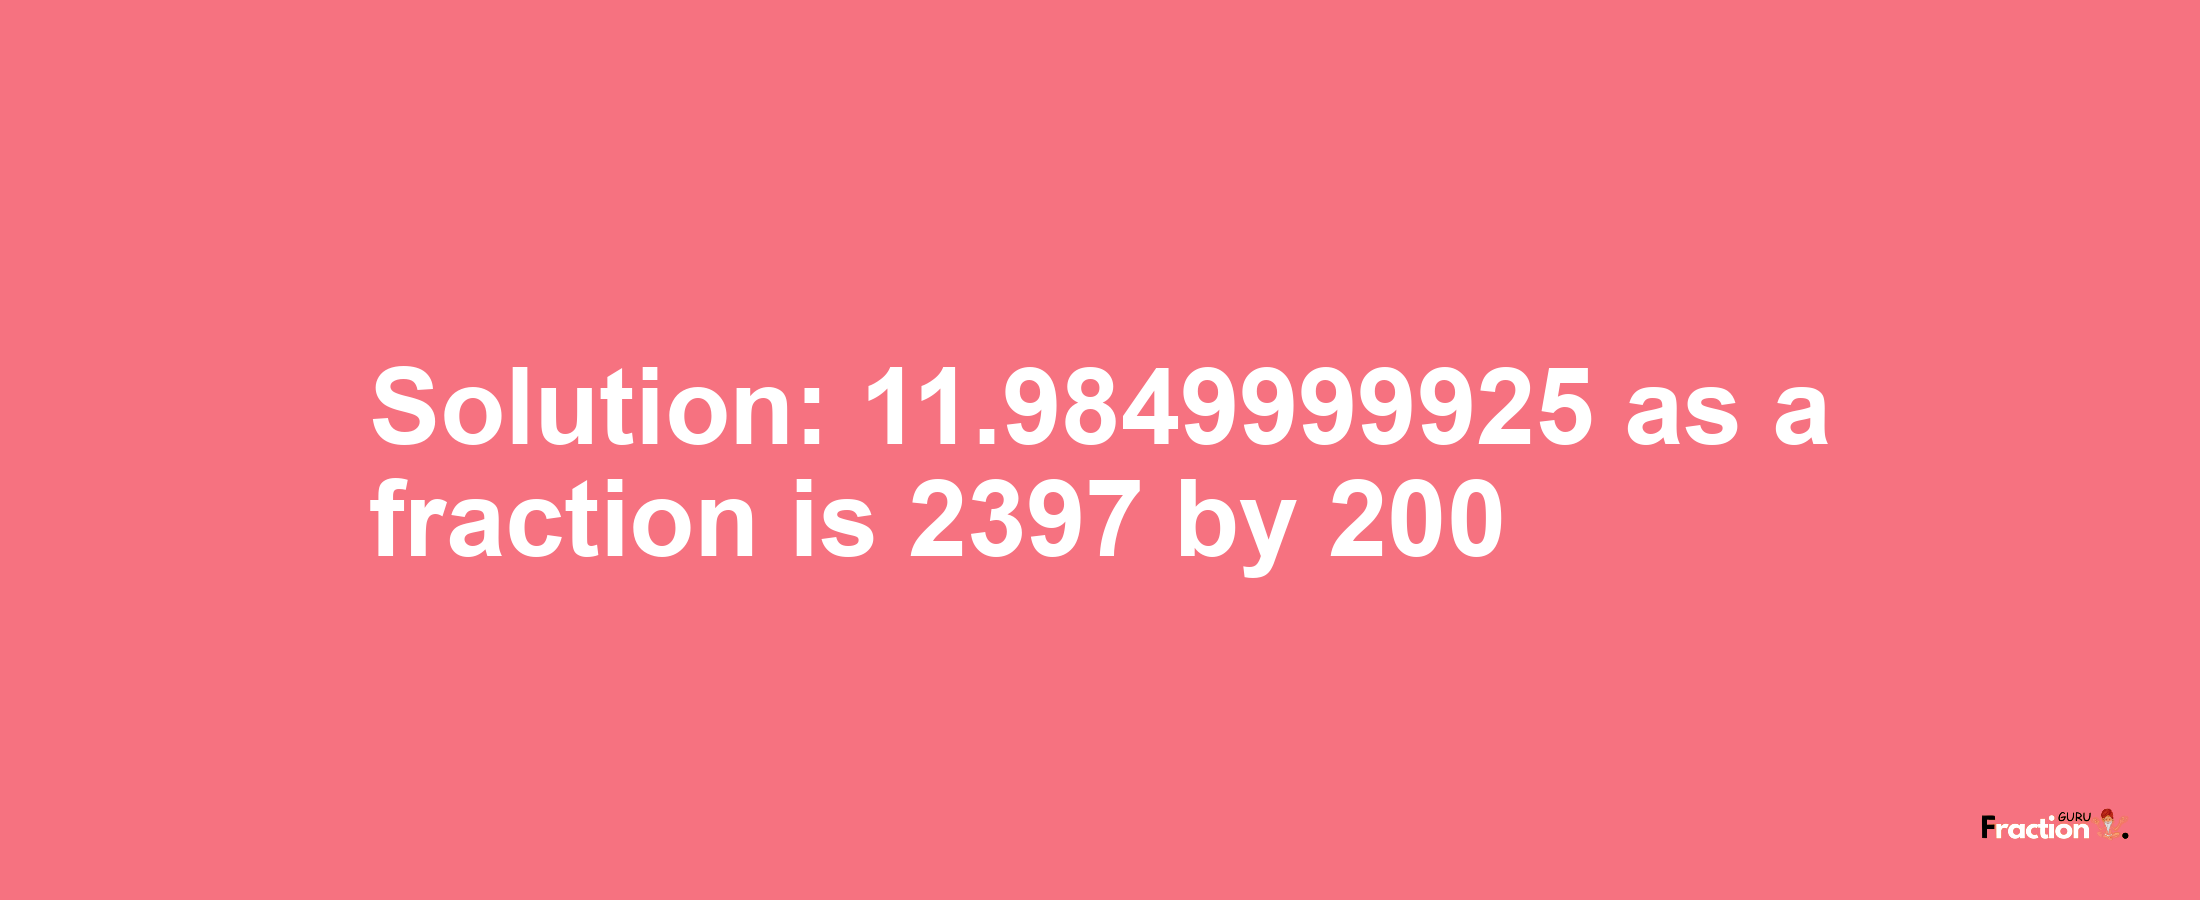 Solution:11.9849999925 as a fraction is 2397/200